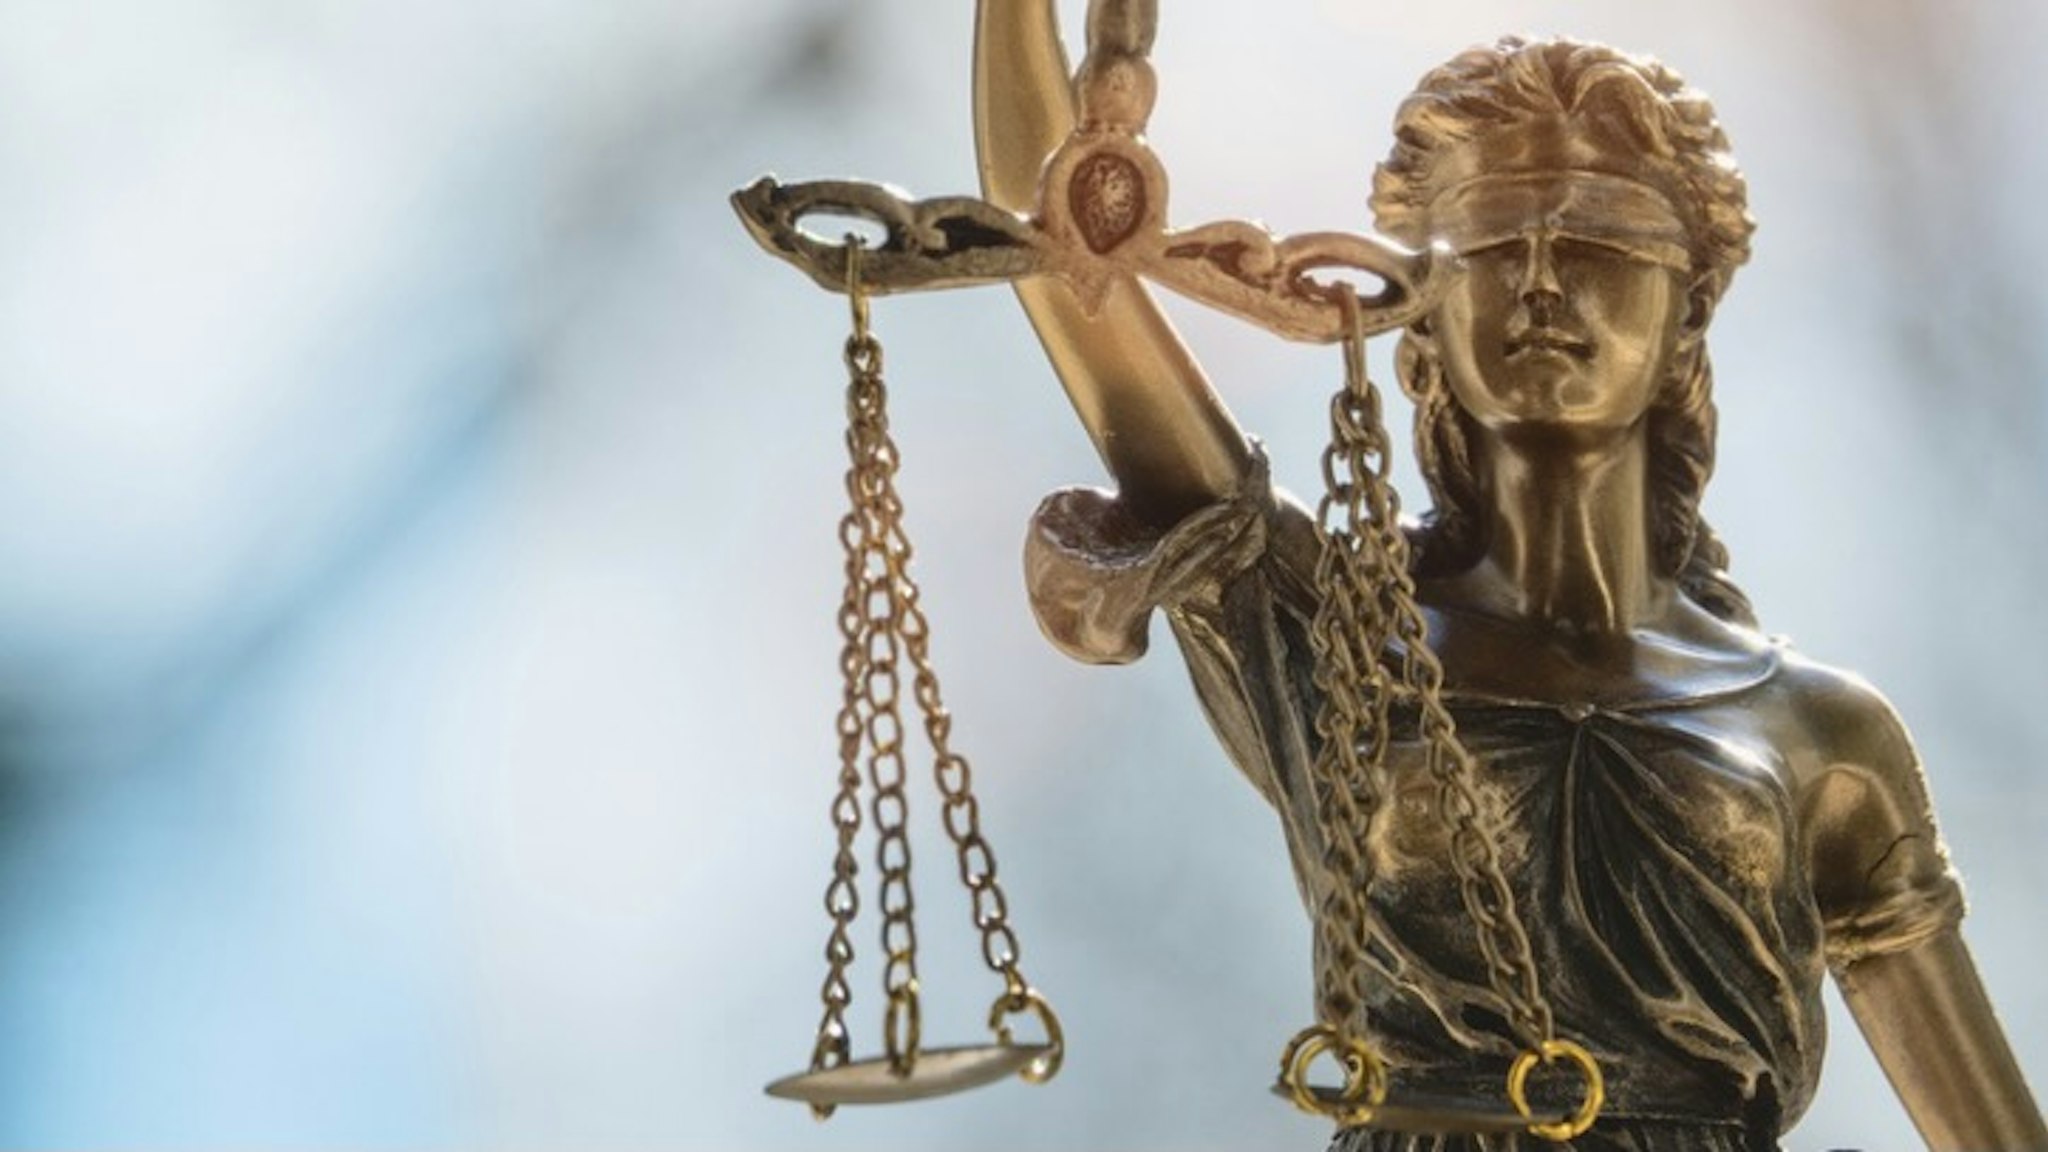 Close-Up Of Statue - stock photo Lady Justice or Justicia in front of blurred background. Goddess of justice.